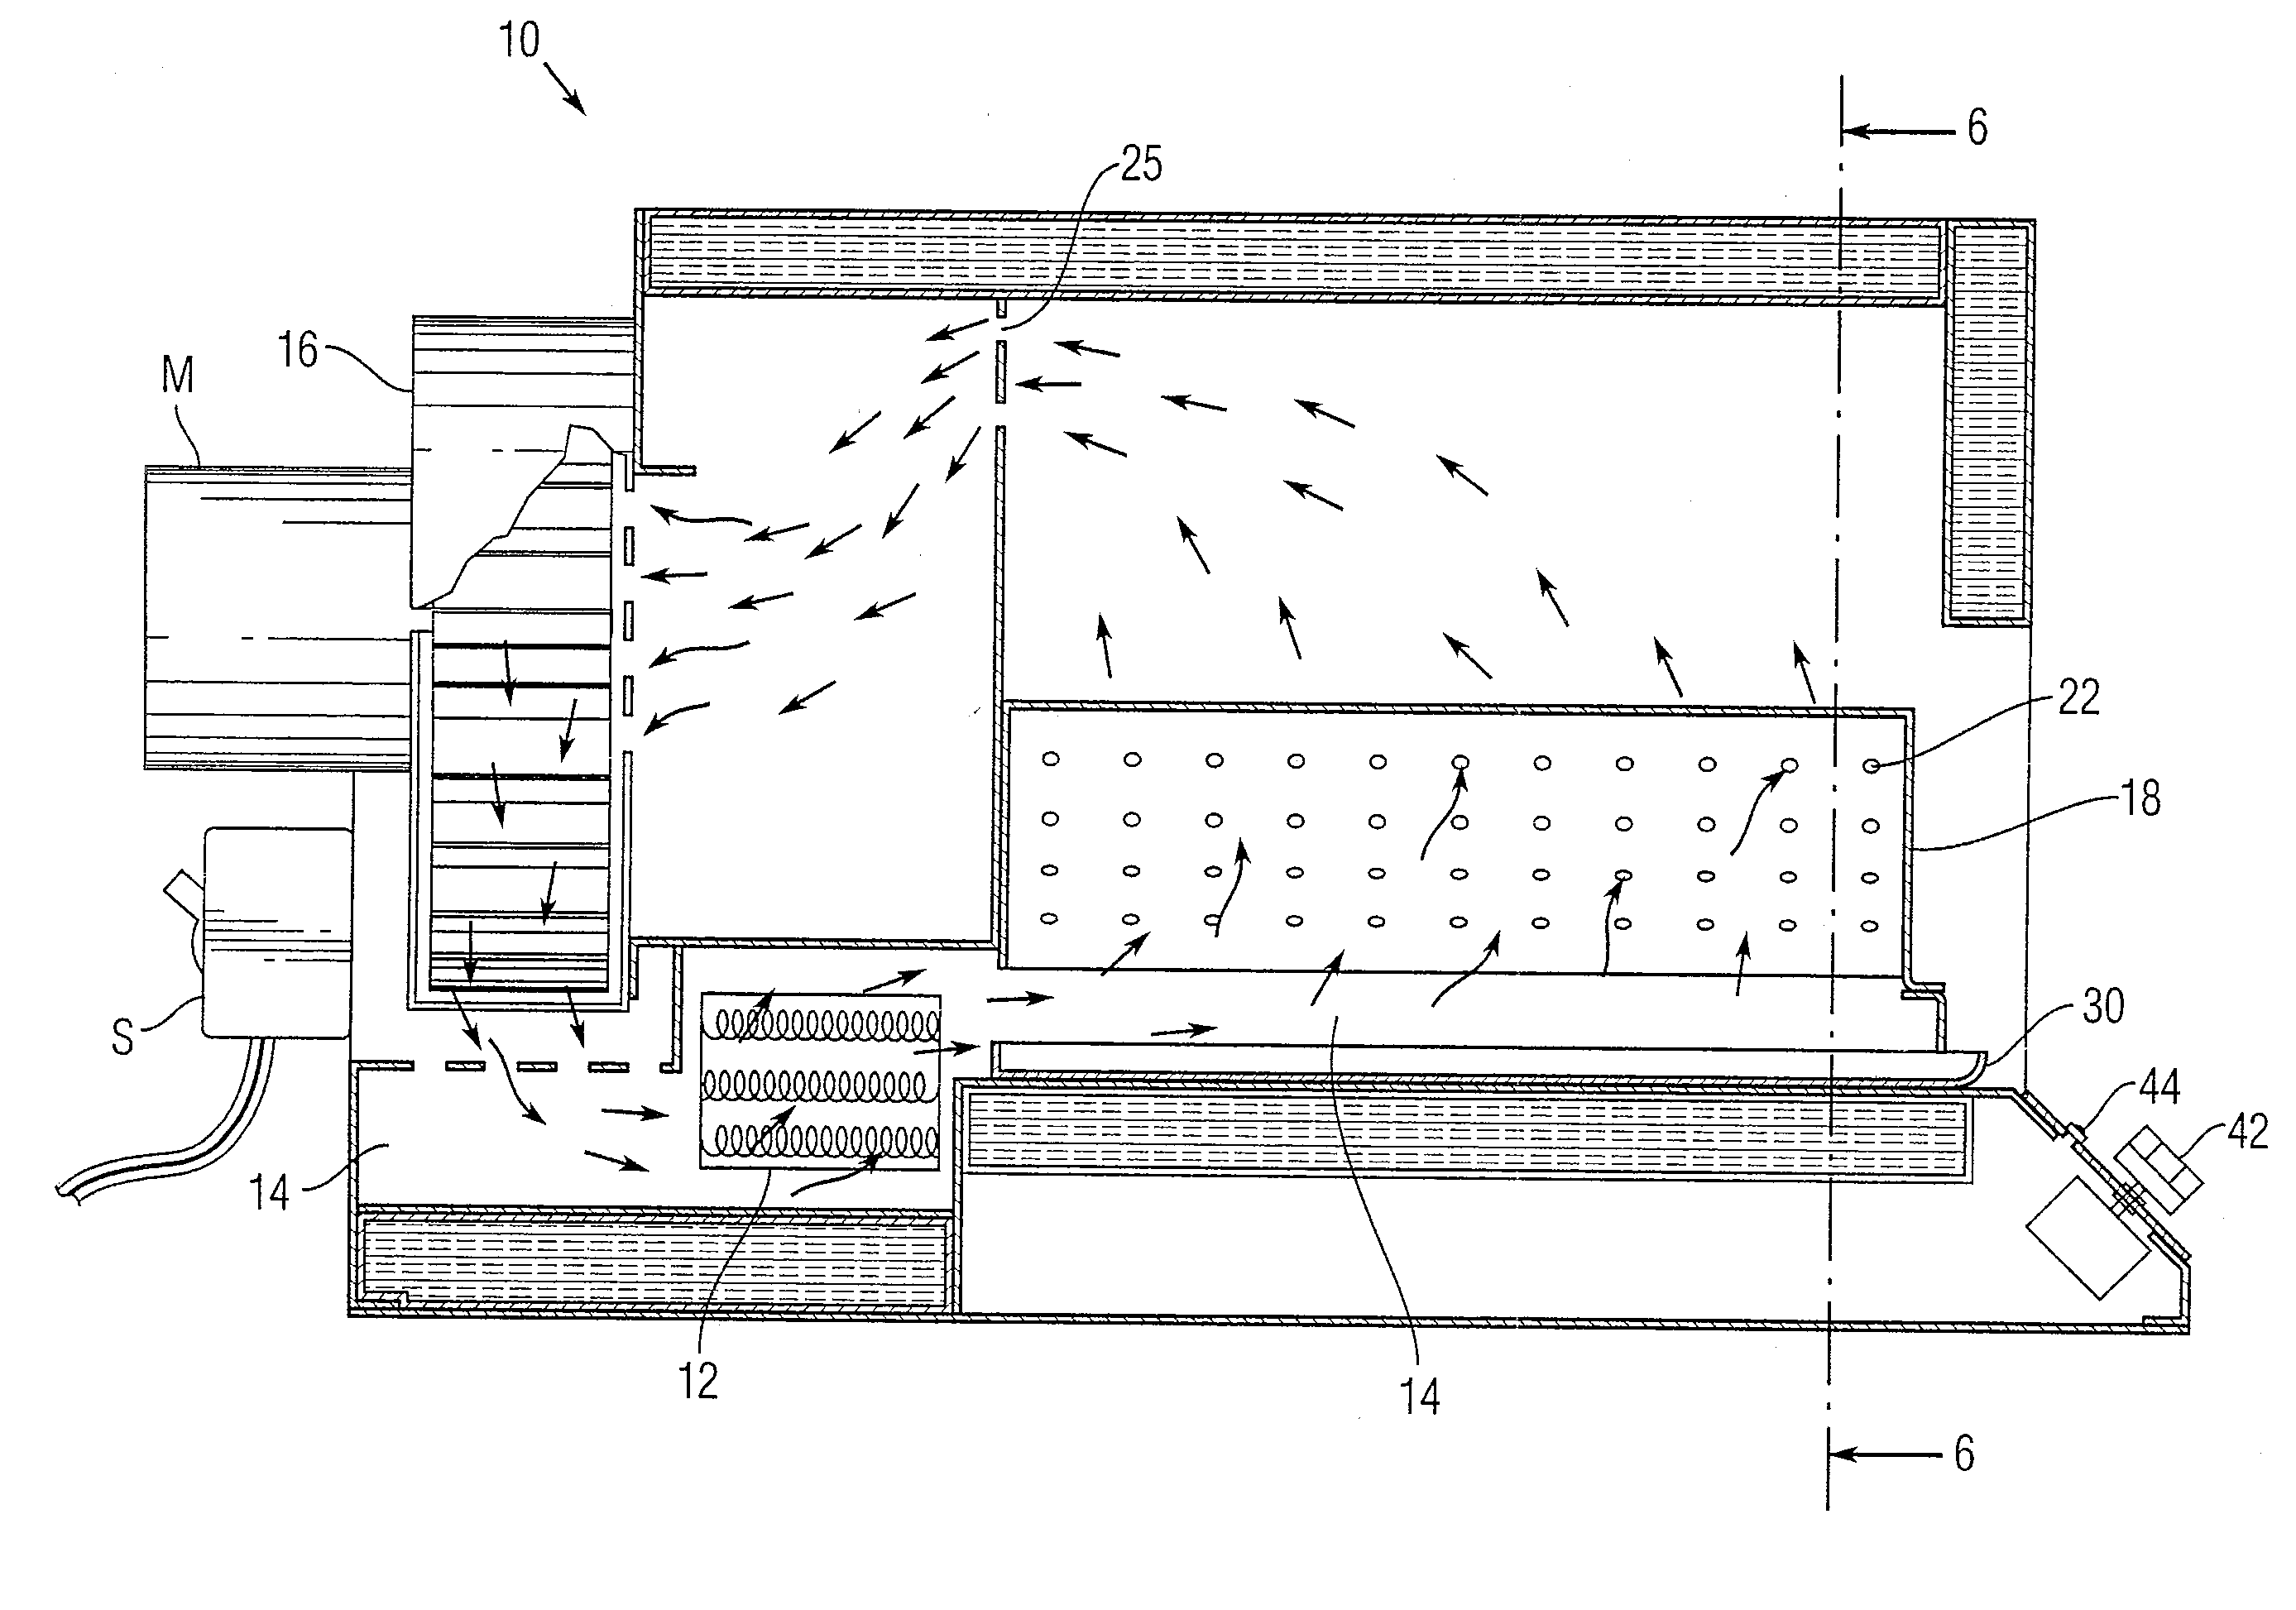 Apparatus and method of toasting sandwiches without heating the sandwich filling